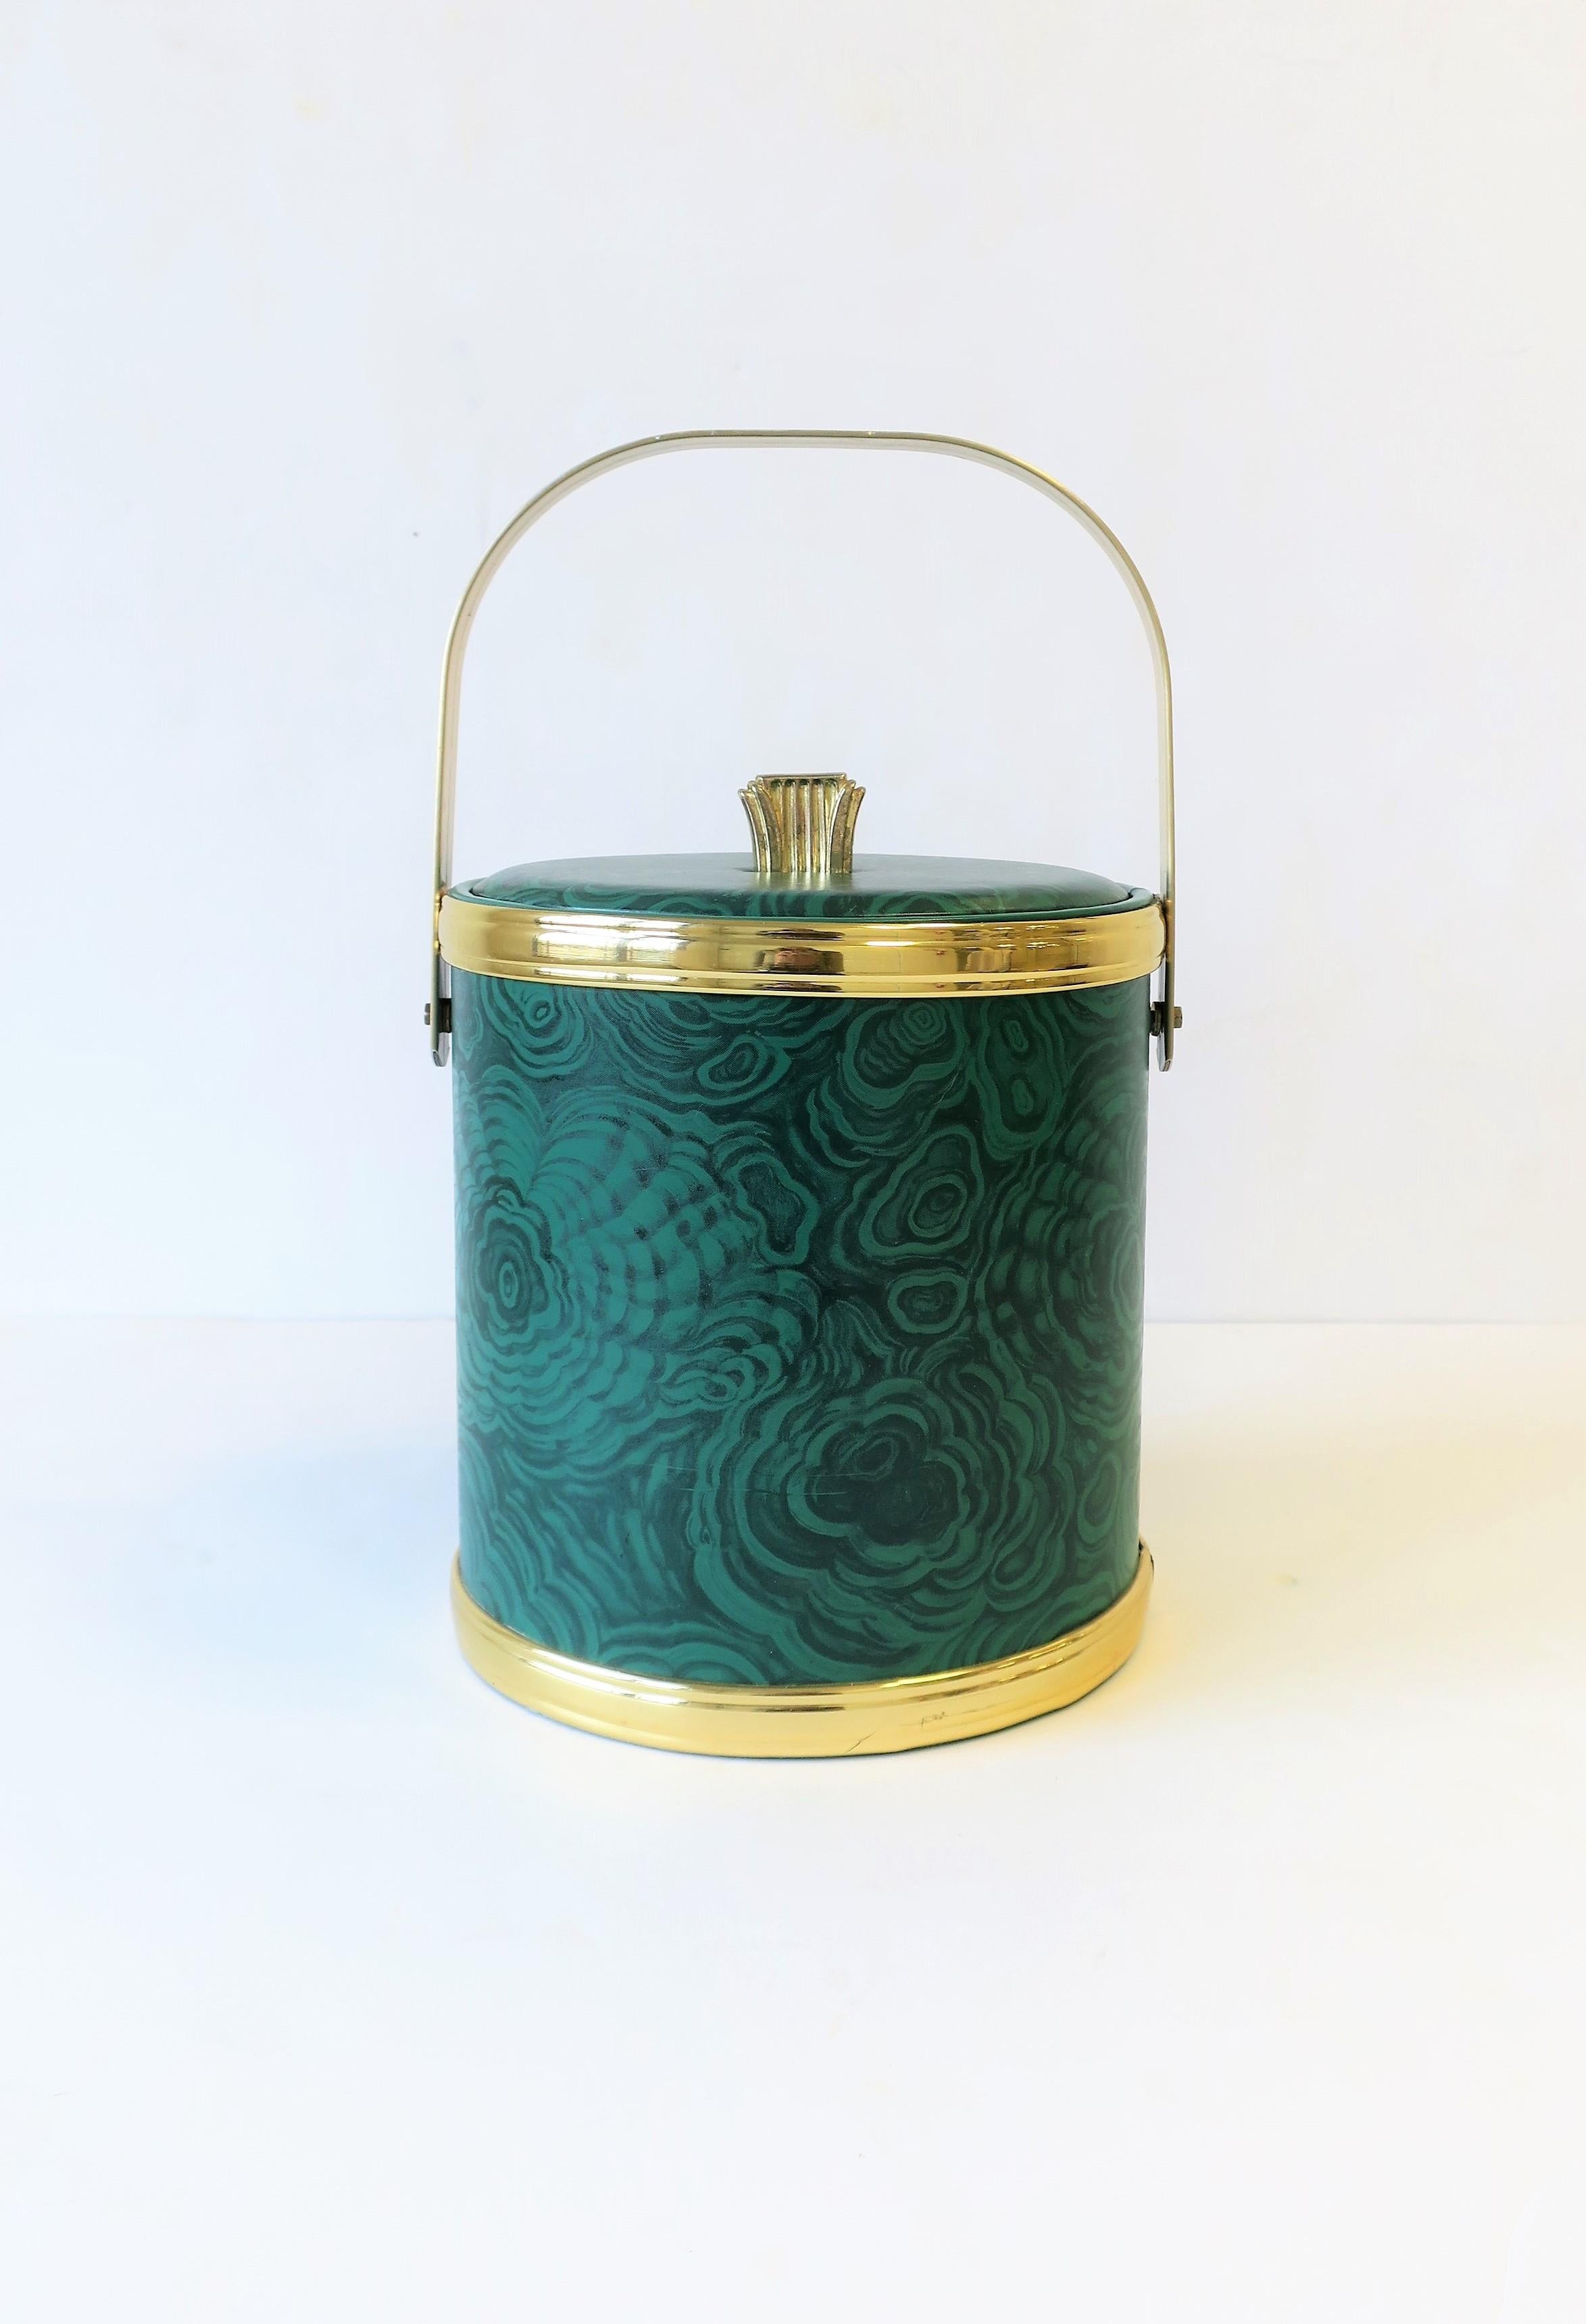 A chic green Malachite style and gold-tone ice bucket or wine/Champagne cooler by designer Georges Briard, circa 1970s. 

Measurements: 
13